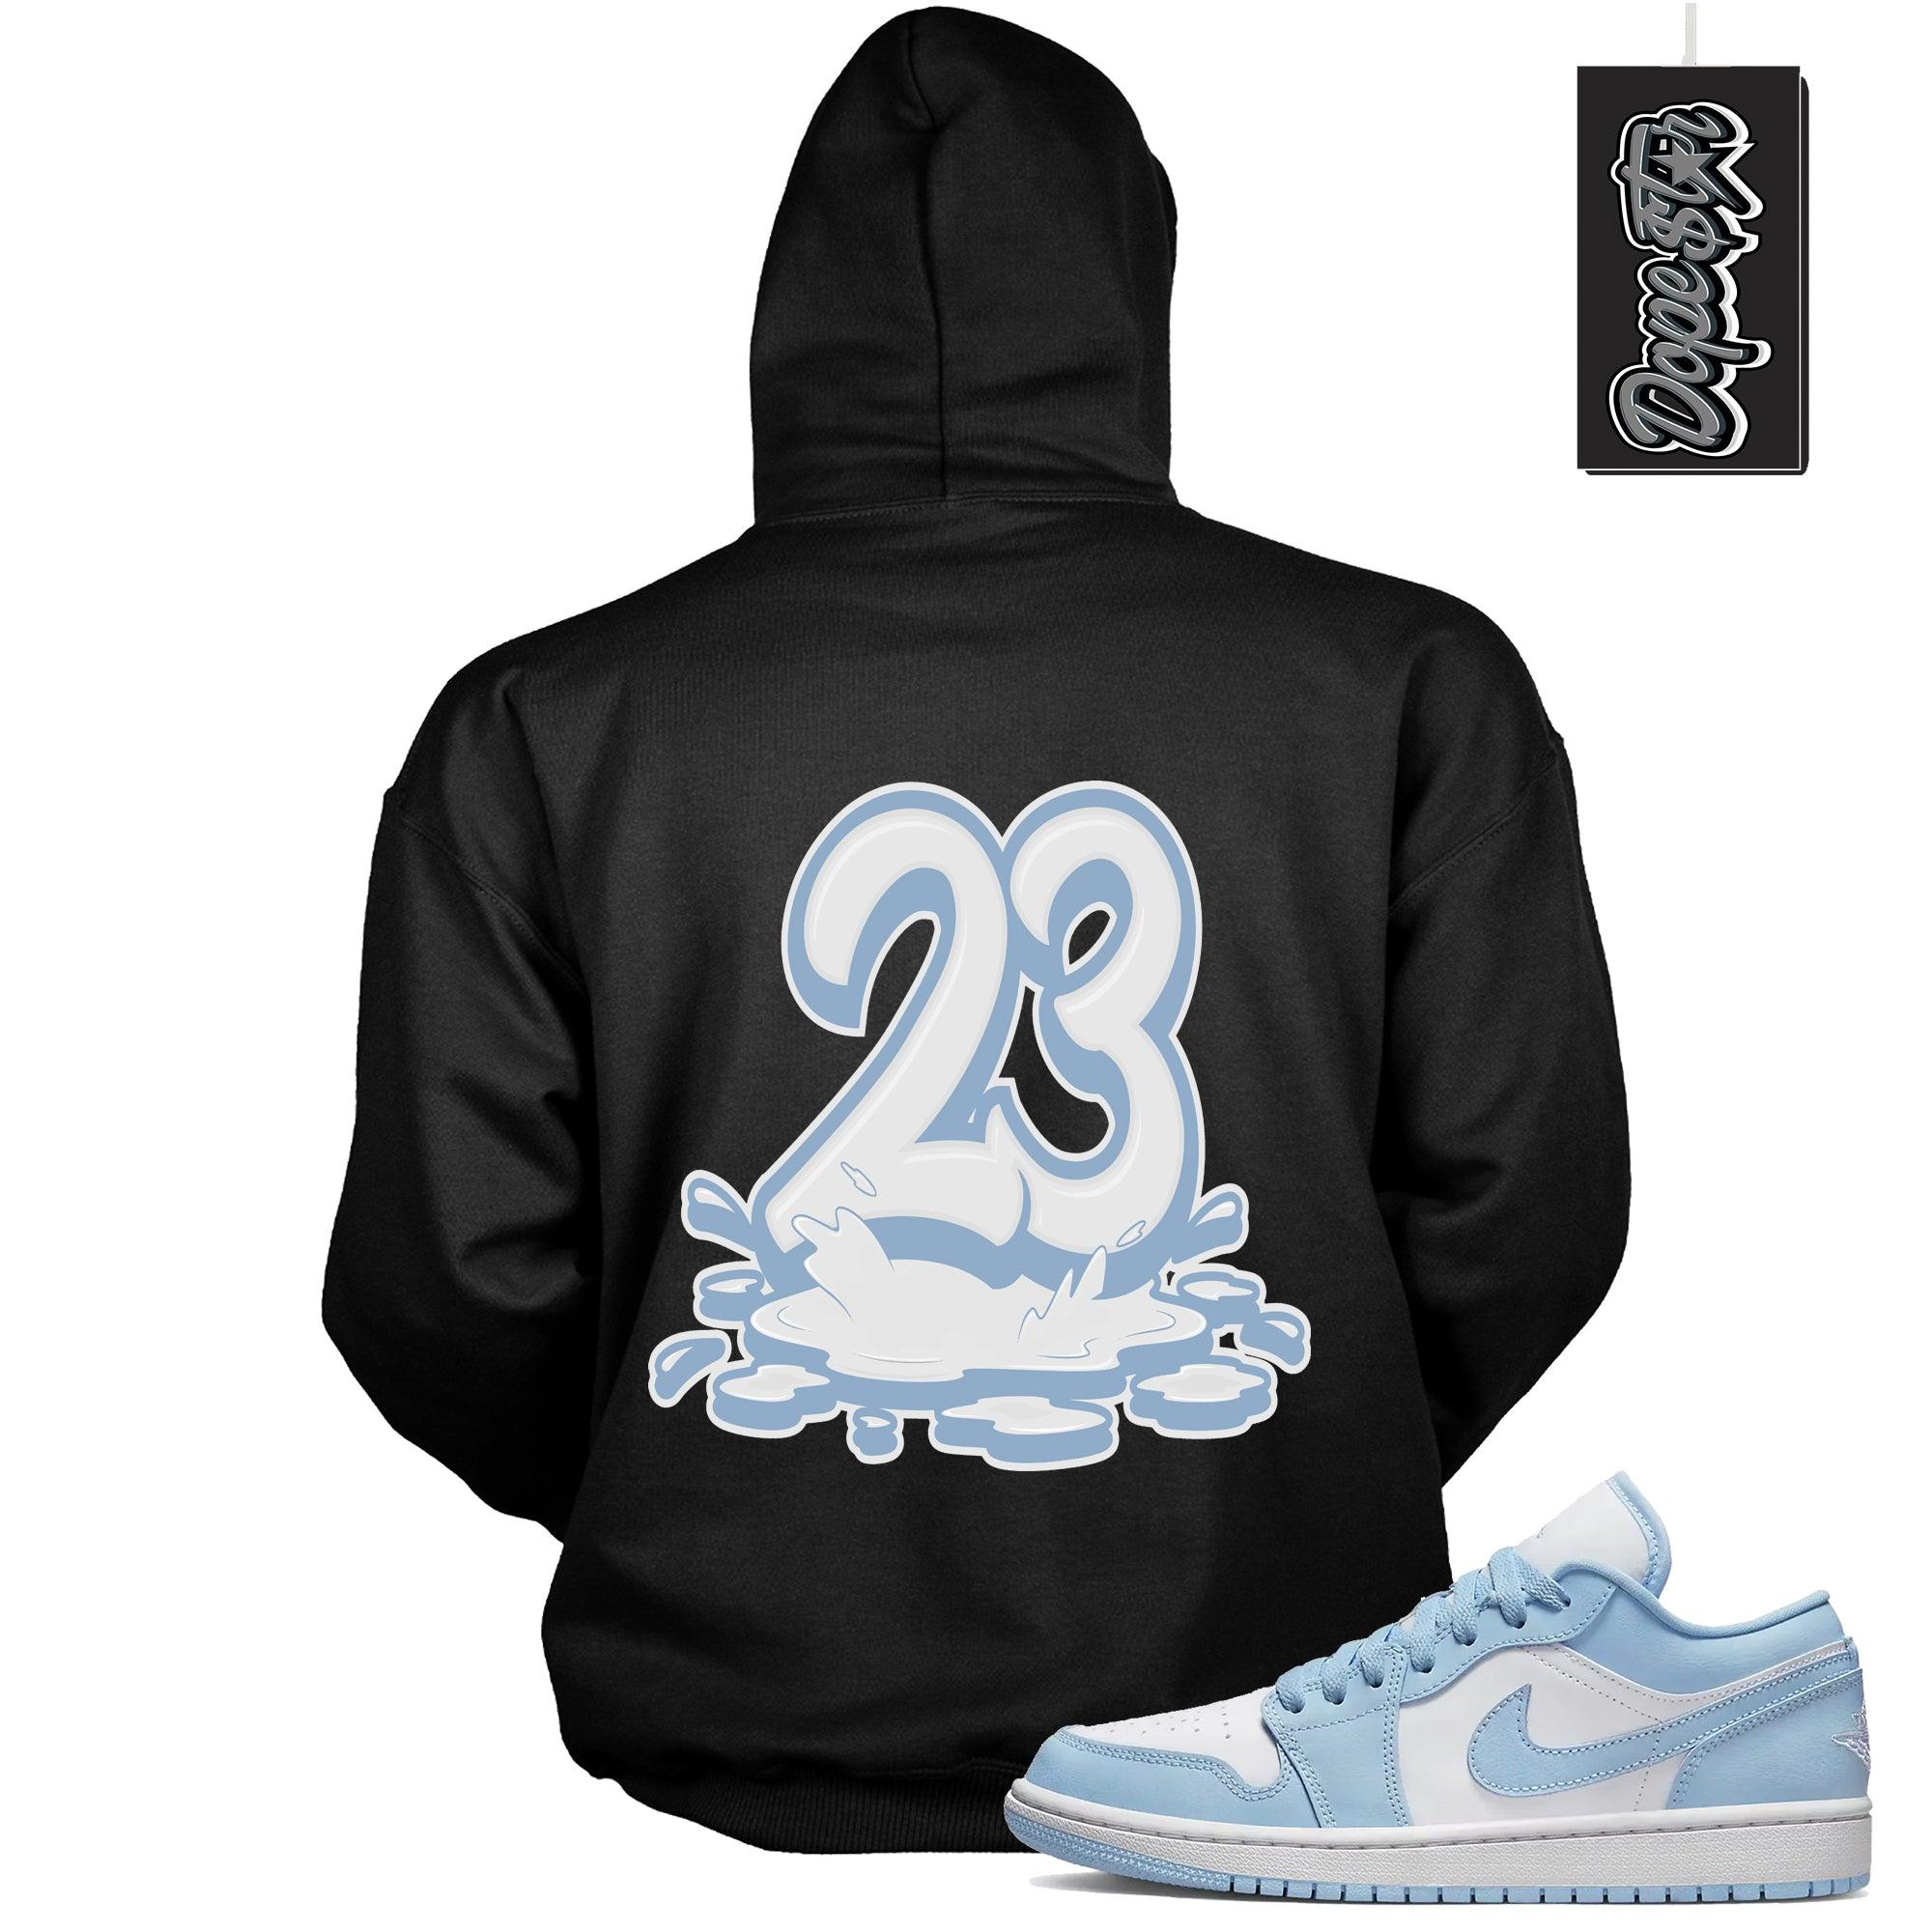 Cool Black Graphic Hoodie with “ Number 23 Melting " print, that perfectly matches AJ 1 Low Aluminum sneakers